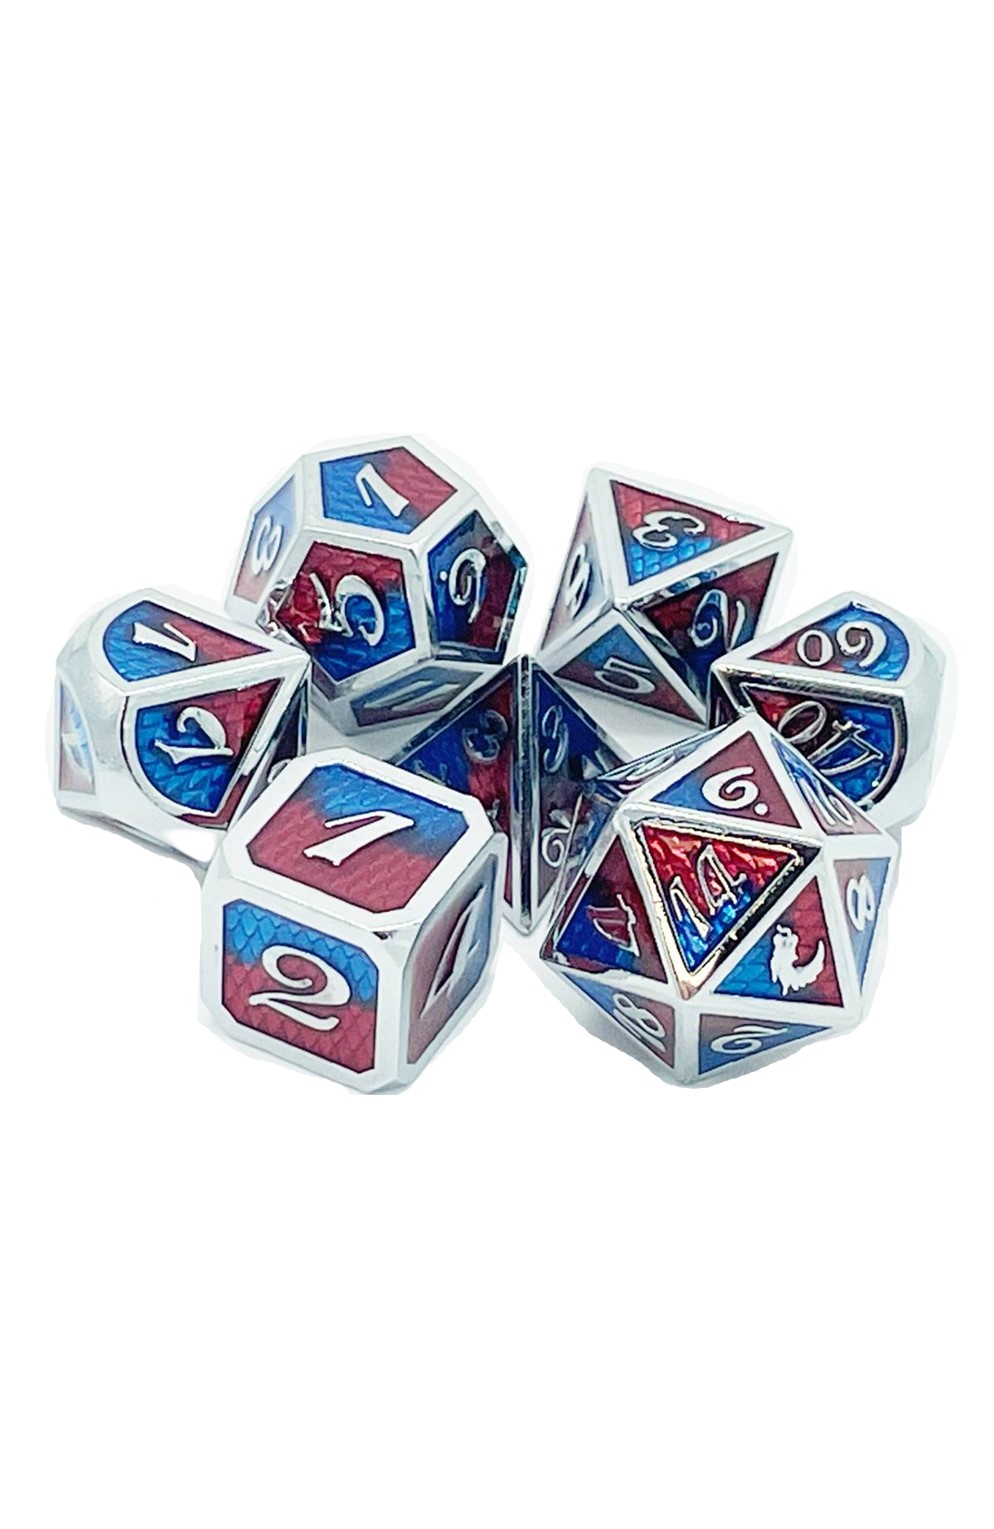 Old School 7 Piece Dnd Rpg Metal Dice Set: Dragon Scale - Red & Blue